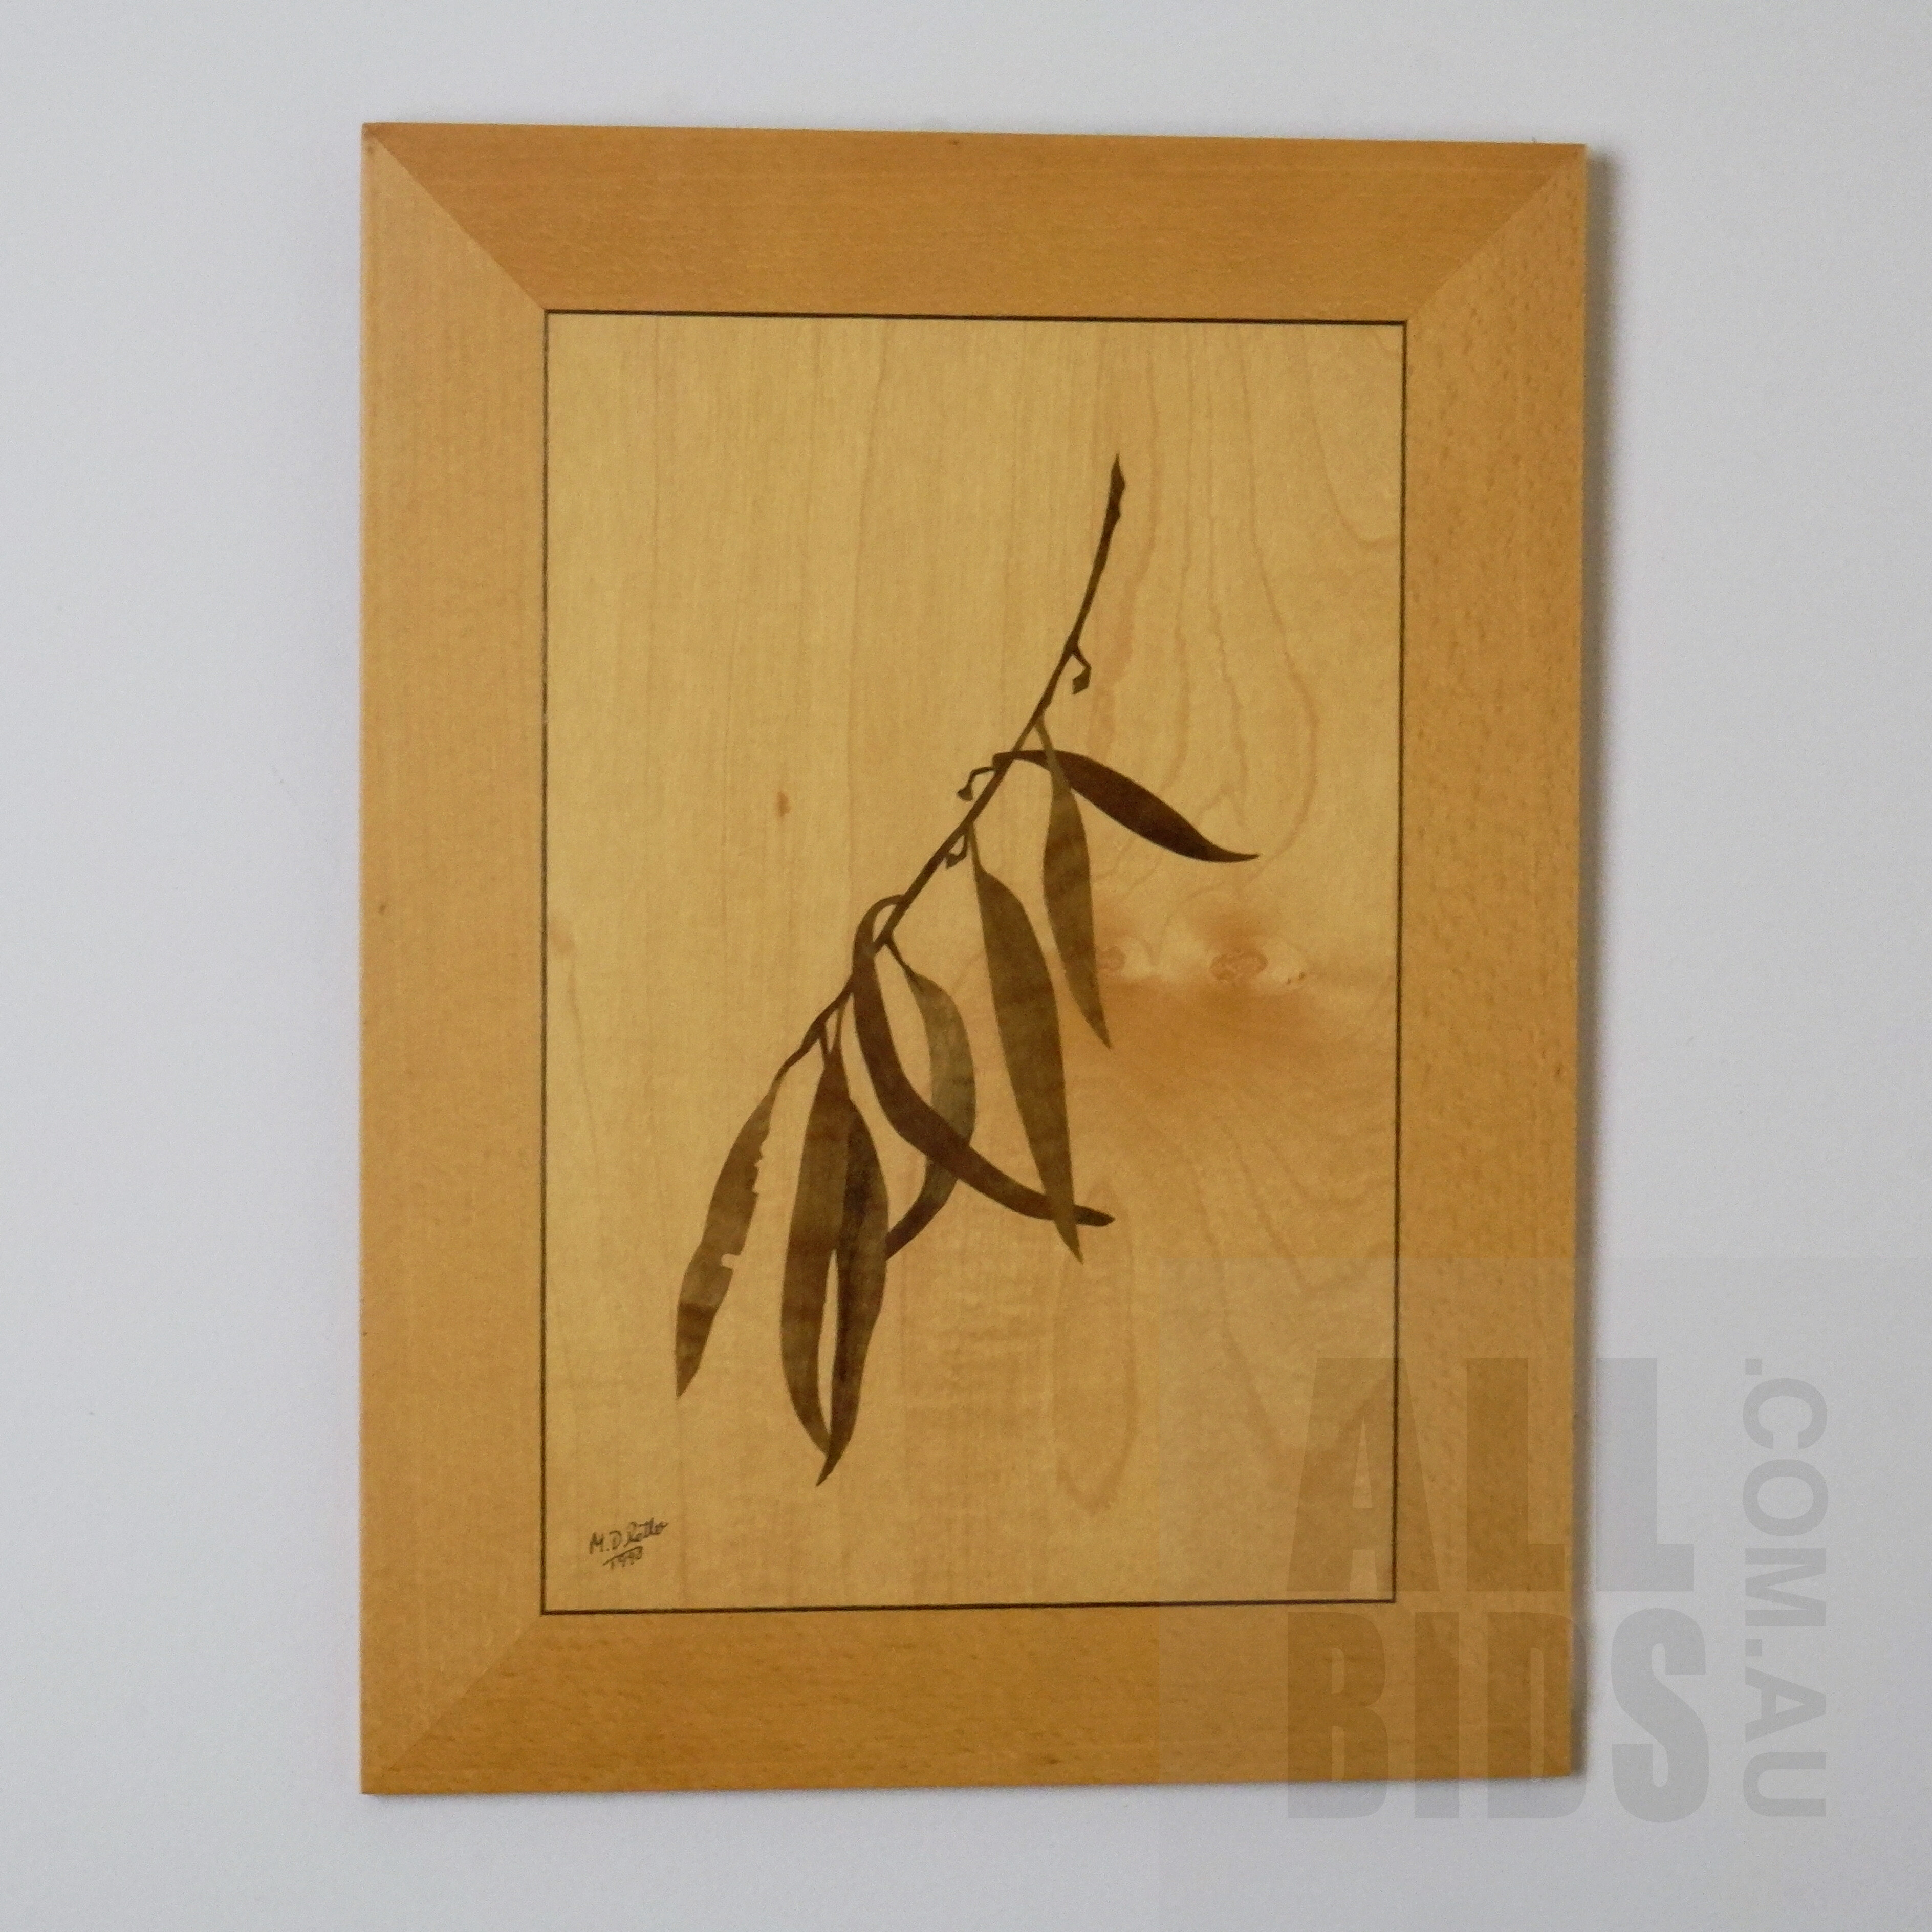 'Michael Retter (20th Century, Australian), Eucalyptus 1990, Marquetry Design including Queensland Walnut, Sycamore and Beech, 38.5 x 28.5 cm (overall)'